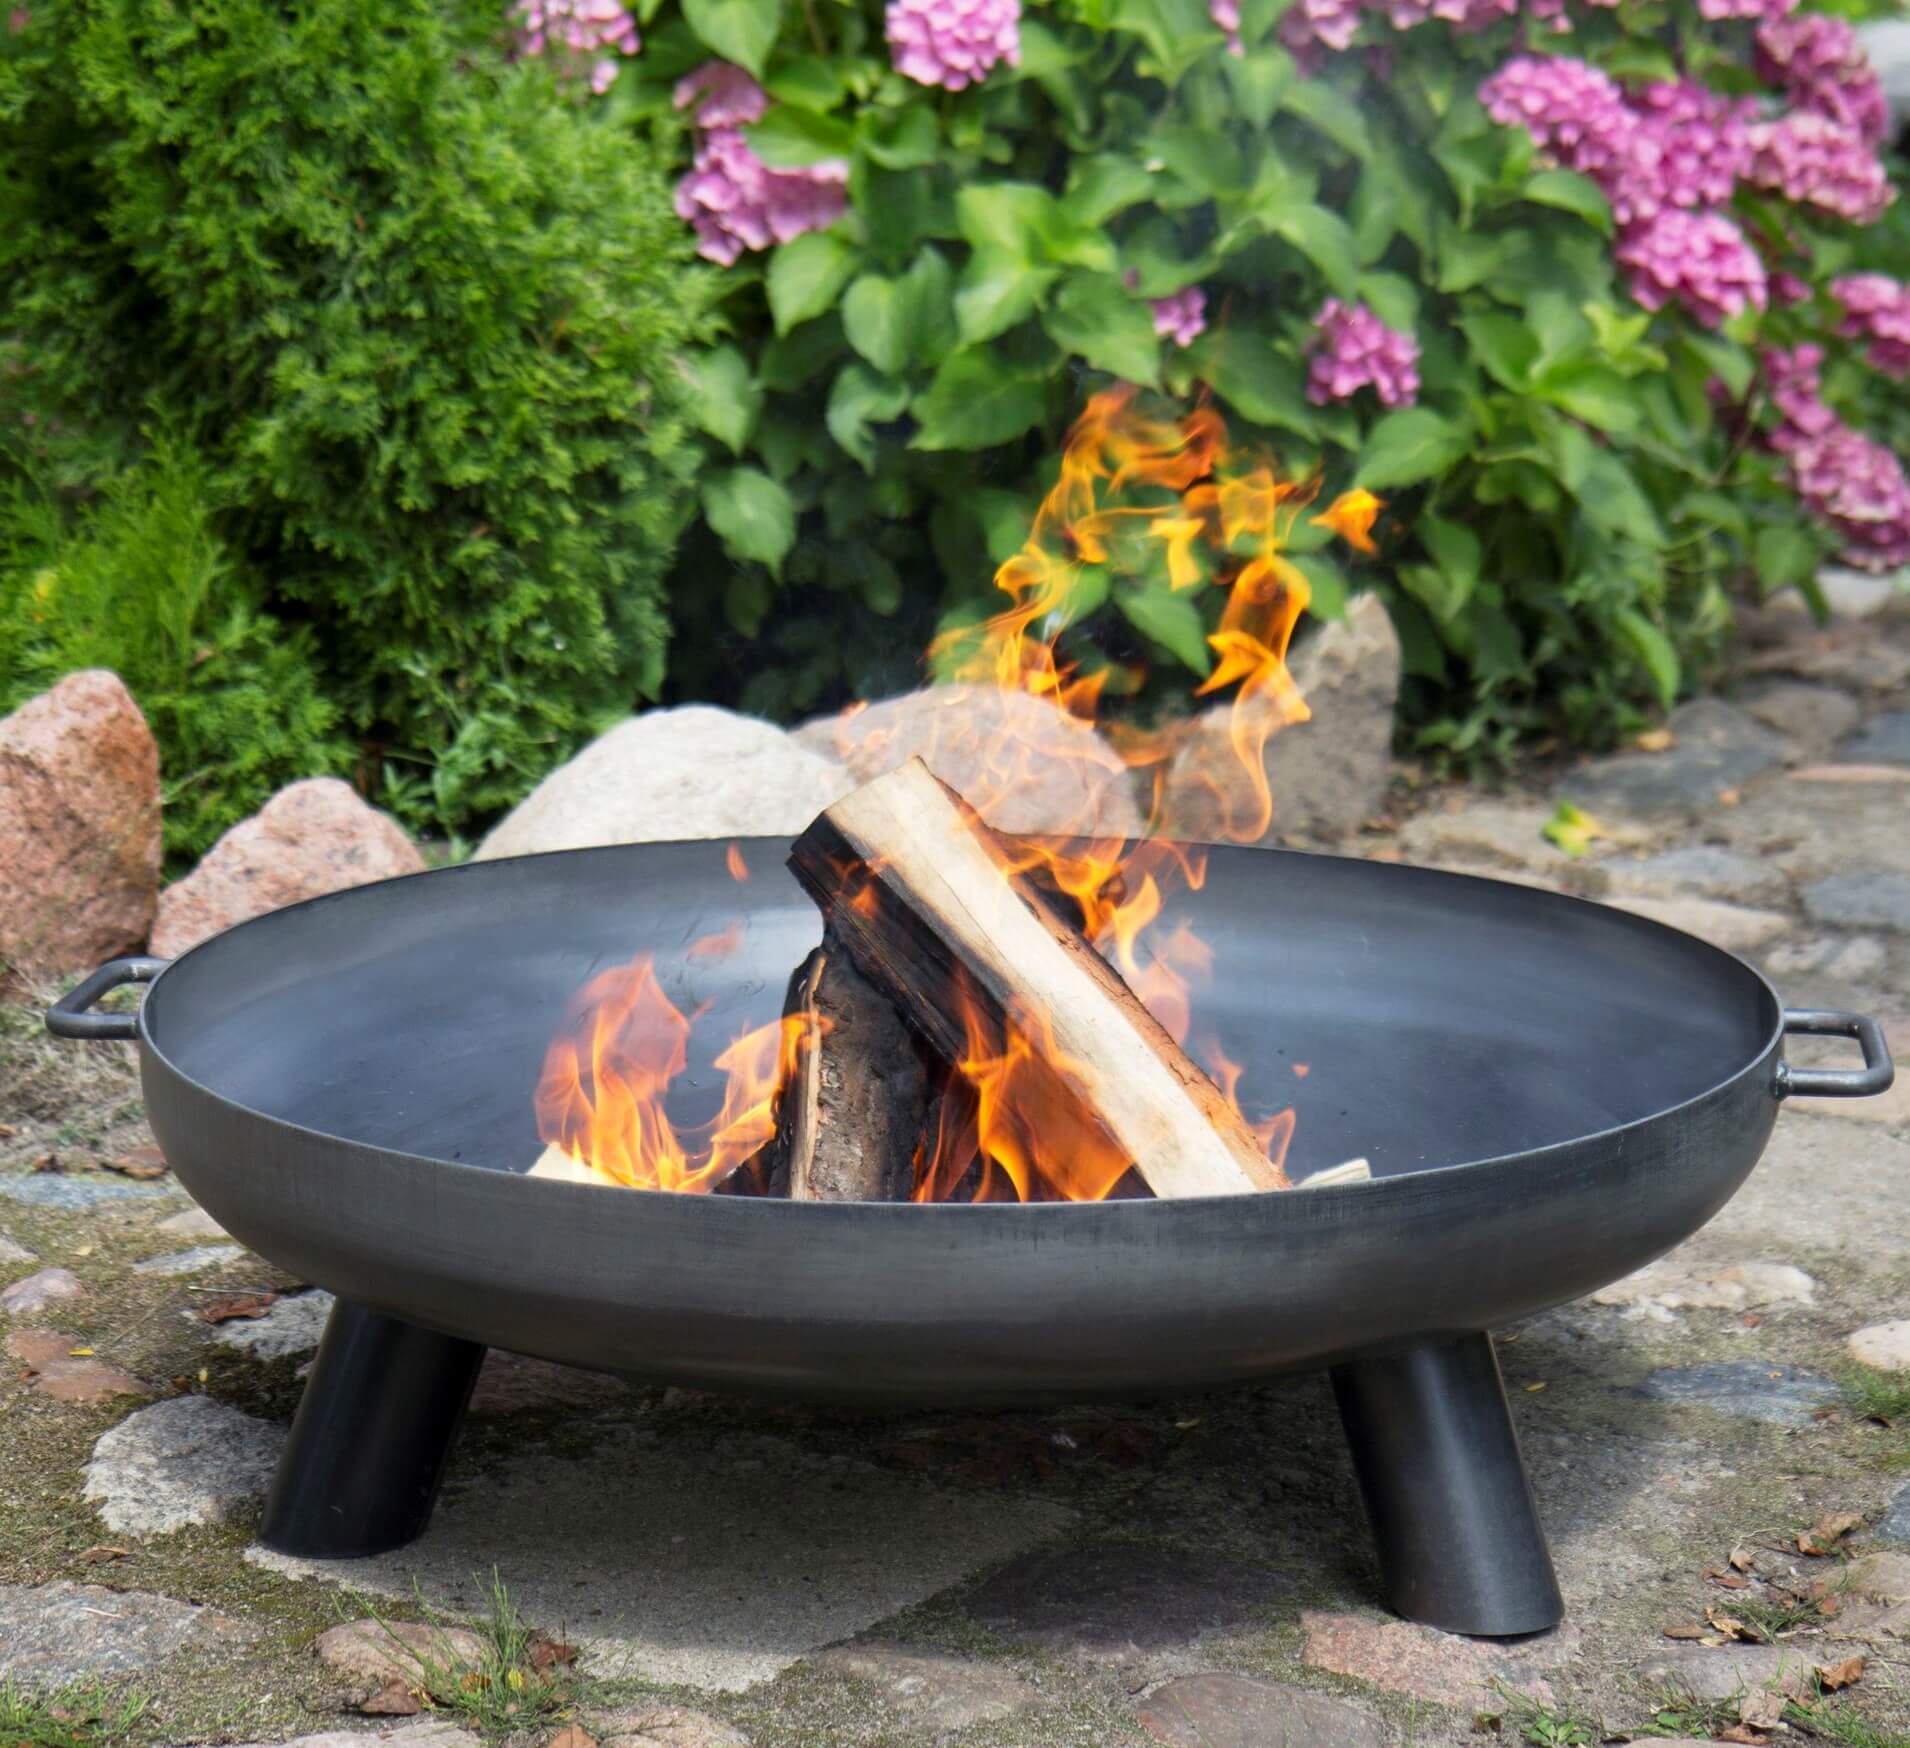 Outdoor Fire Pit - Durable Fire Pits Built To Last - Order ...